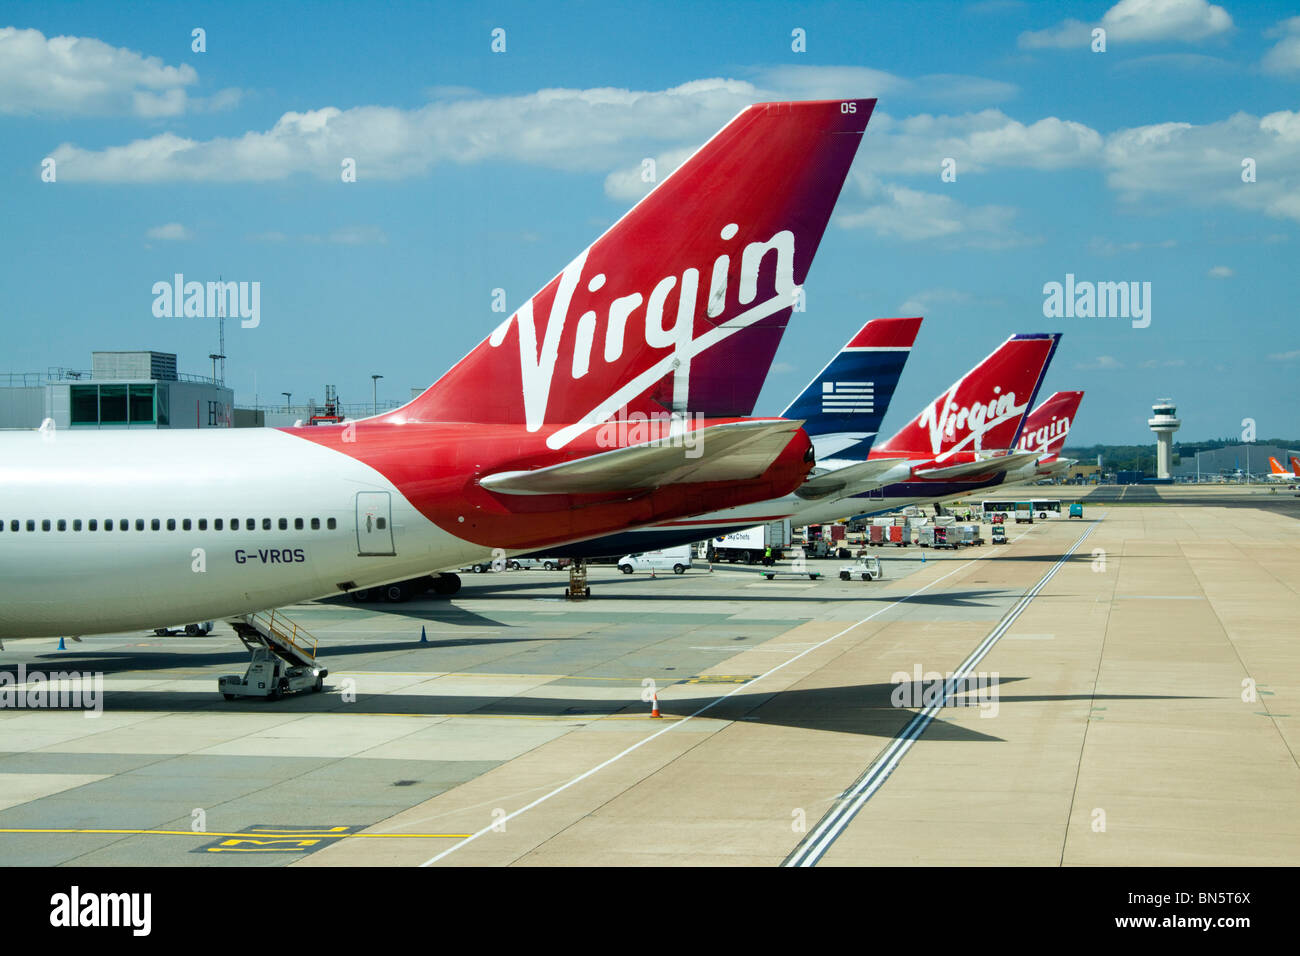 Virgin Airlines aircrafts, Gatwick Airport, England, UK Stock Photo